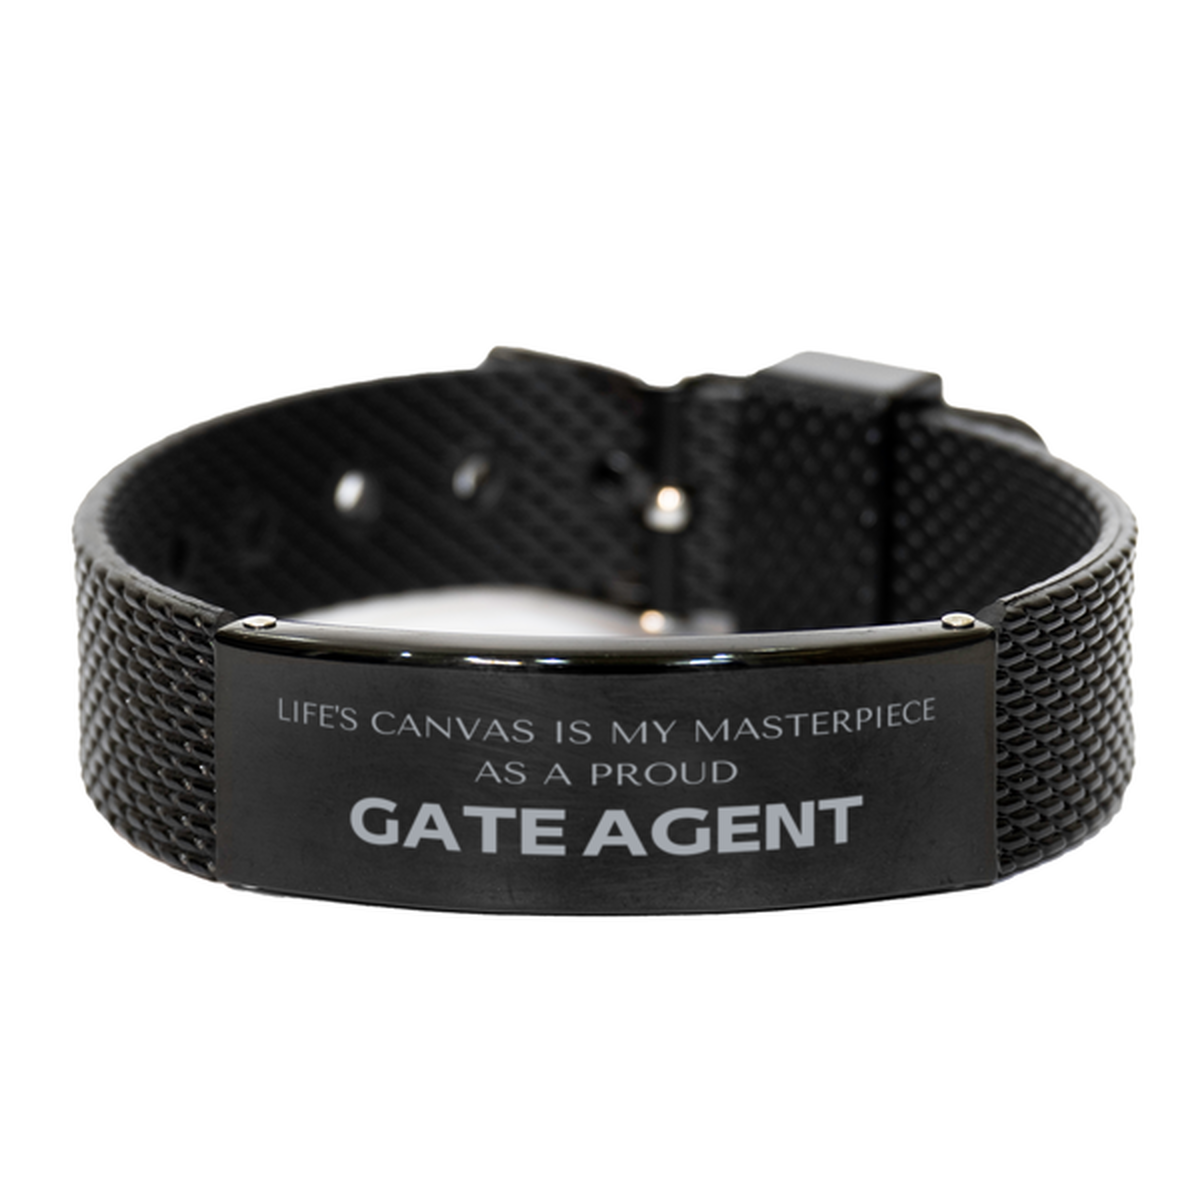 Proud Gate Agent Gifts, Life's canvas is my masterpiece, Epic Birthday Christmas Unique Black Shark Mesh Bracelet For Gate Agent, Coworkers, Men, Women, Friends